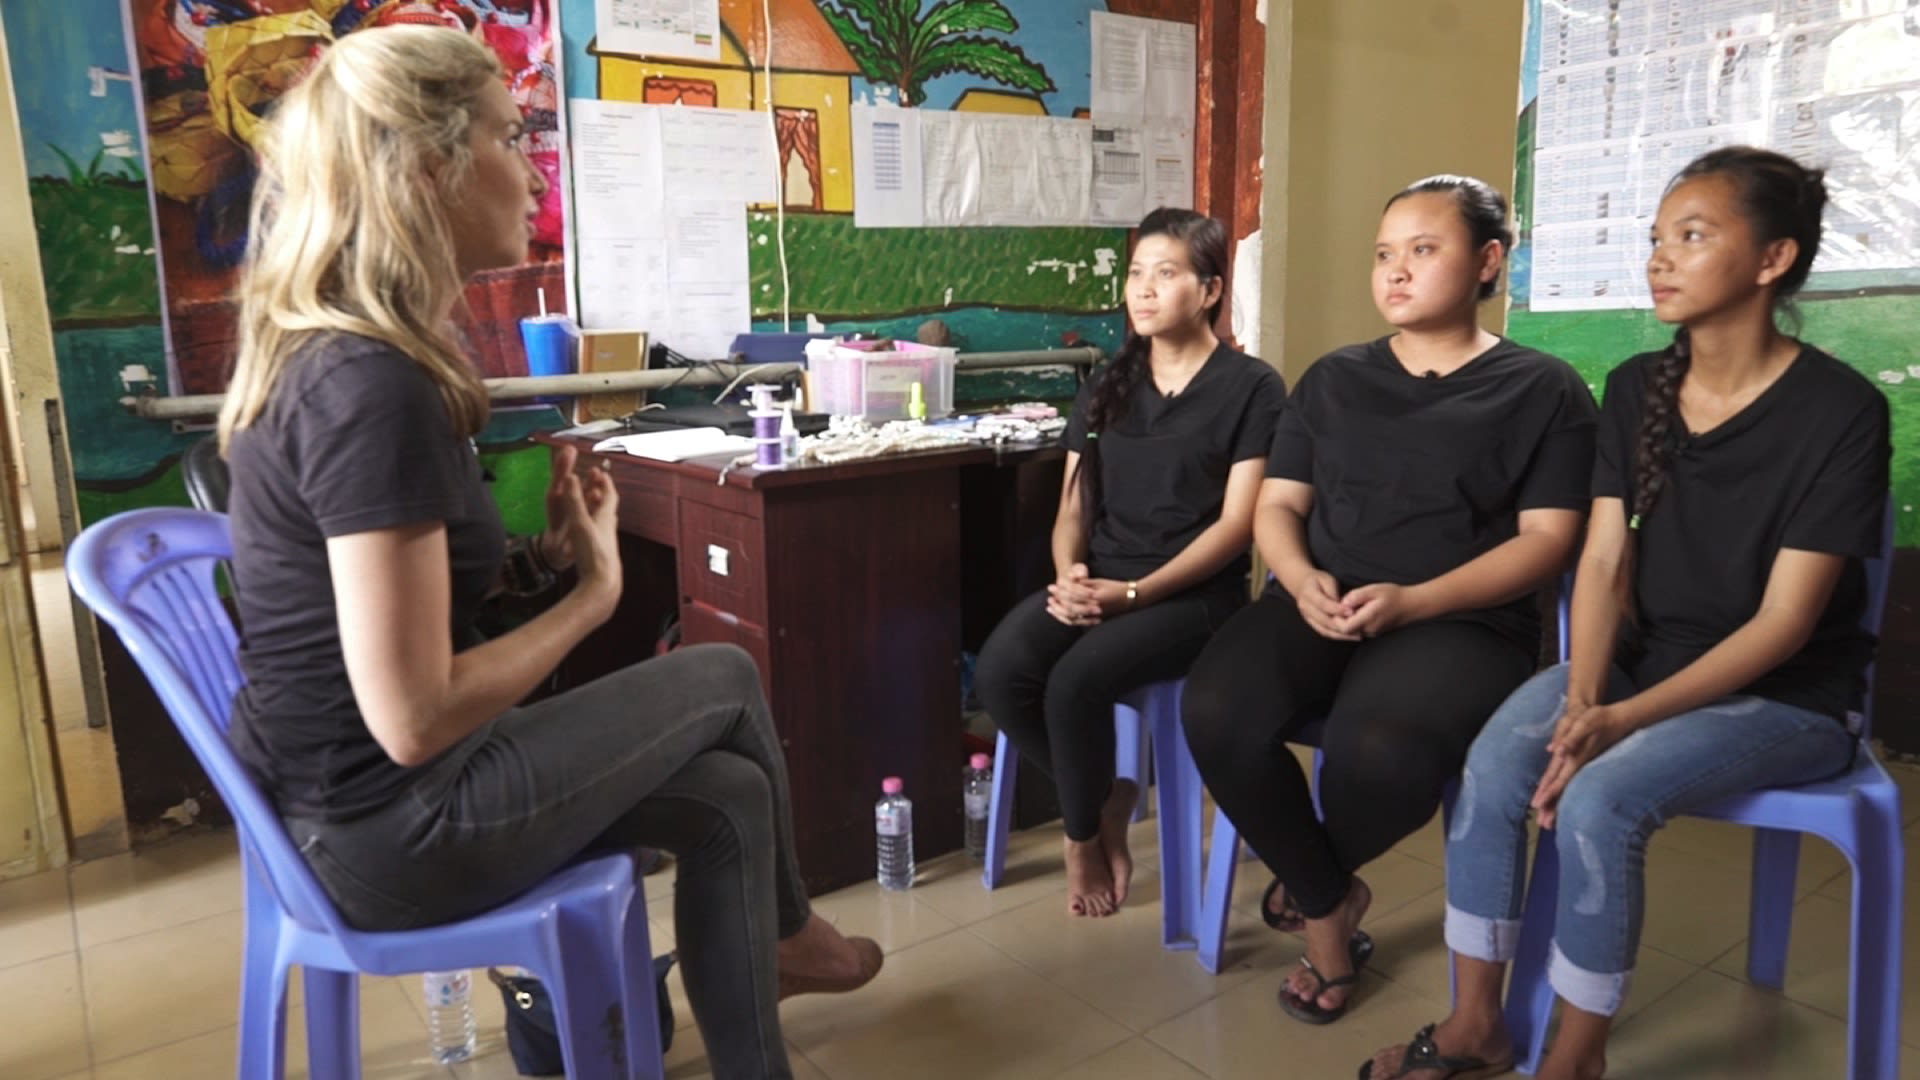 Horses Grill Xxx - Sex trafficking victims in Cambodia speak out | CNN